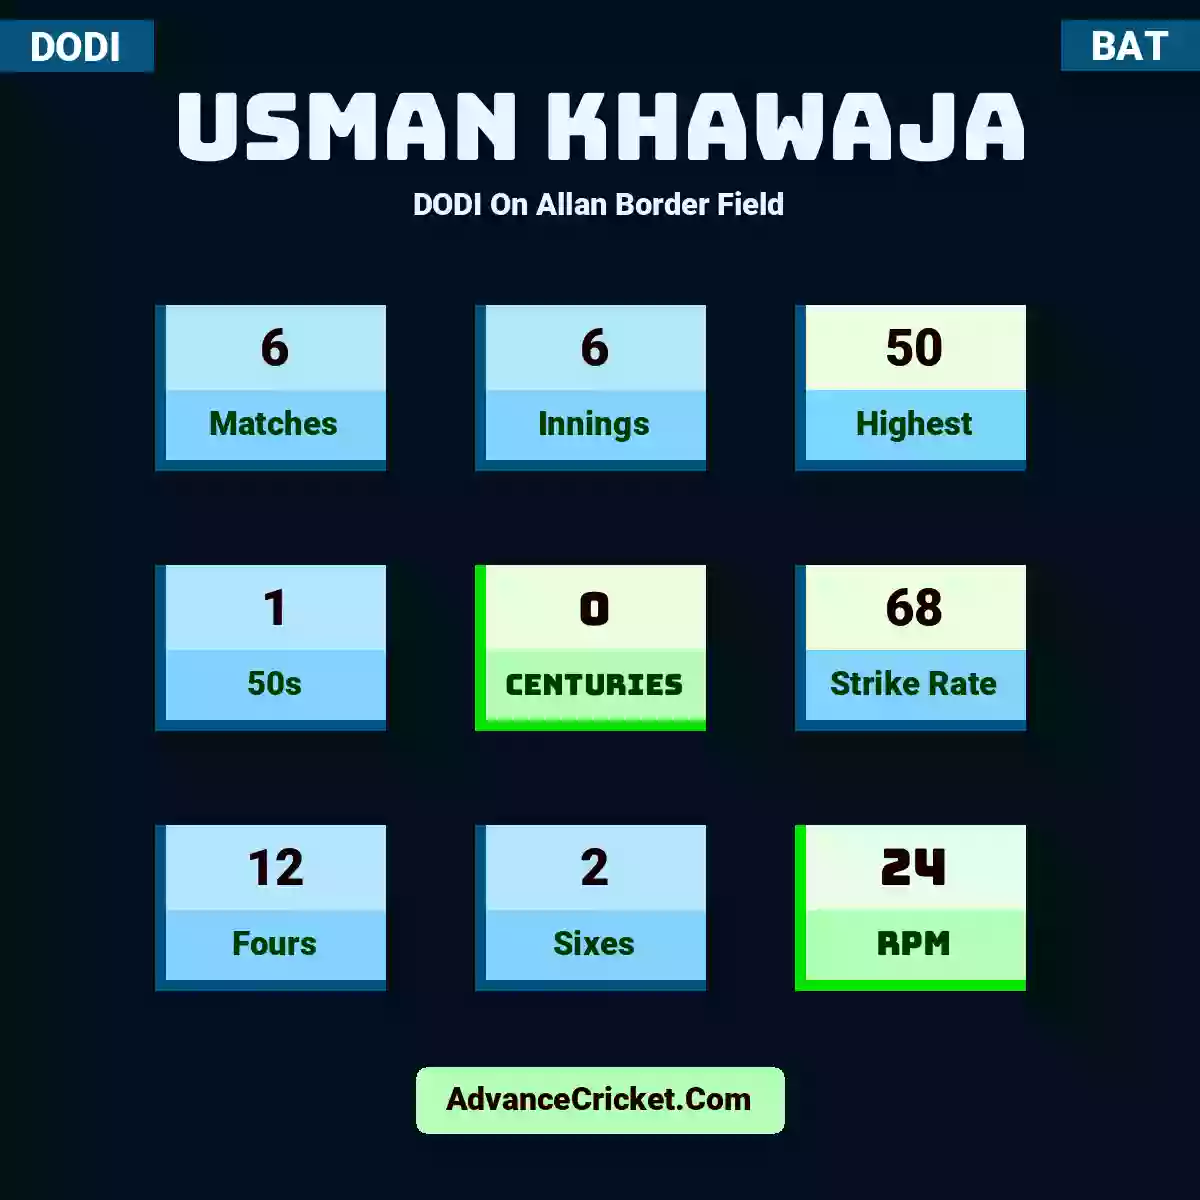 Usman Khawaja DODI  On Allan Border Field, Usman Khawaja played 6 matches, scored 50 runs as highest, 1 half-centuries, and 0 centuries, with a strike rate of 68. U.Khawaja hit 12 fours and 2 sixes, with an RPM of 24.